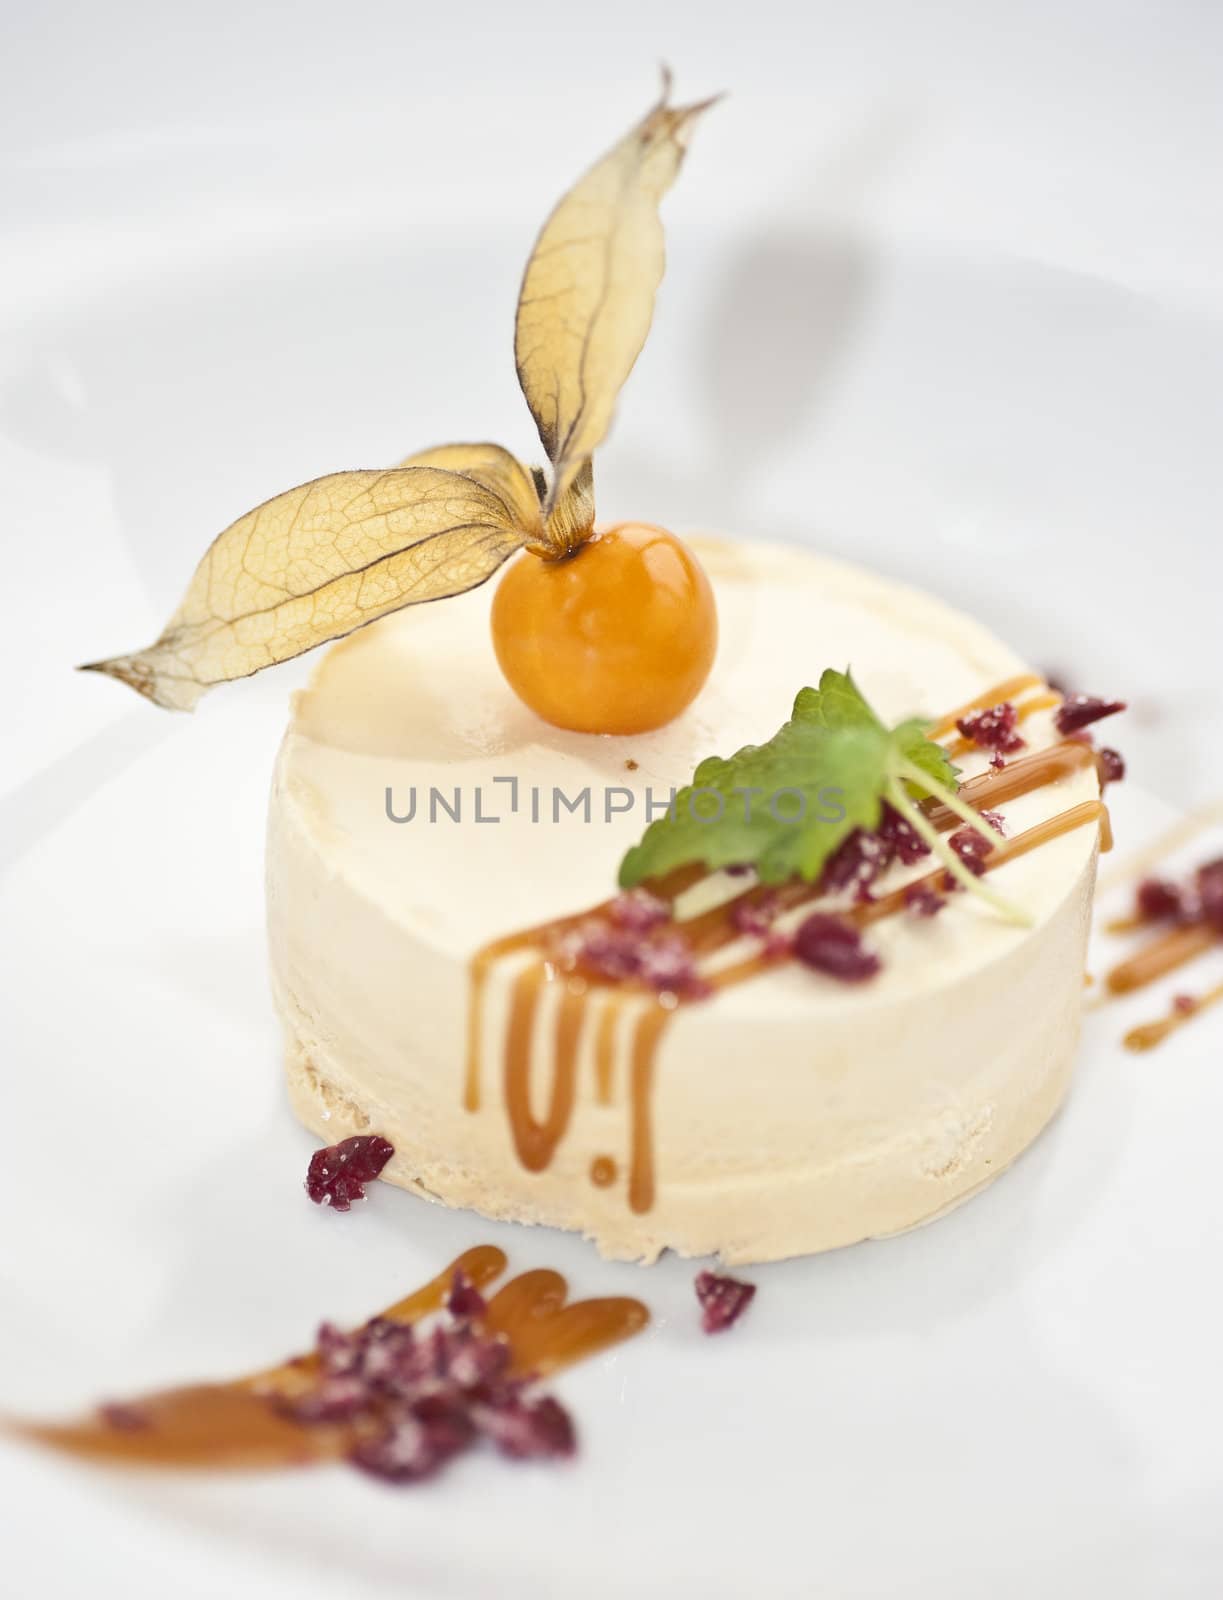 A portion of caramel parfait with a physalis and some mint on top